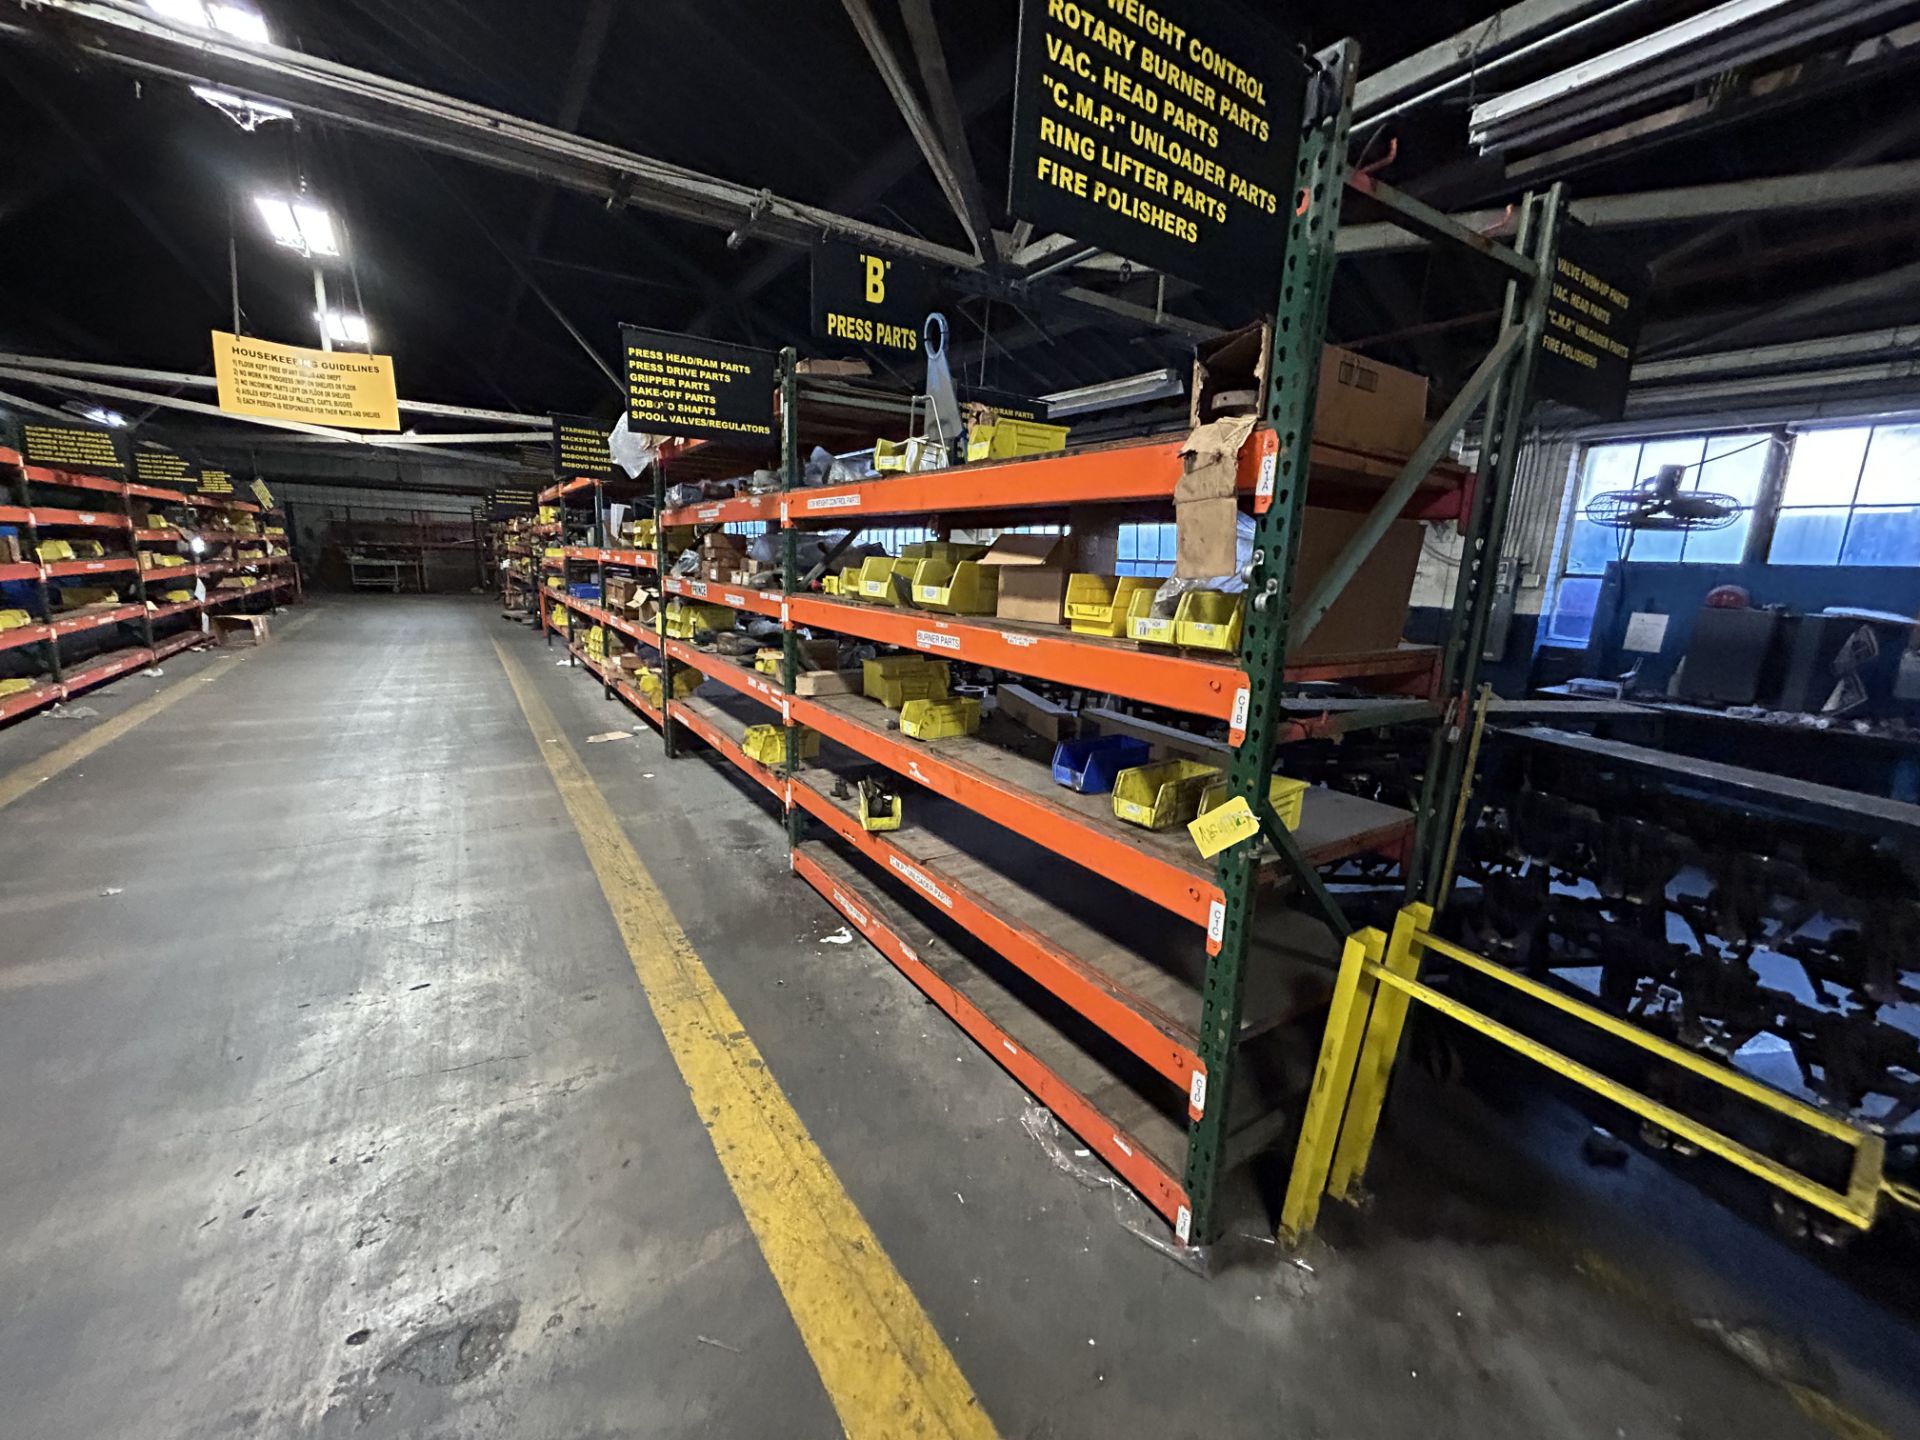 Pallet Racking (Does Not Include Contents), Includes 13 Uprights, Teardrop Style Pallet Racking,